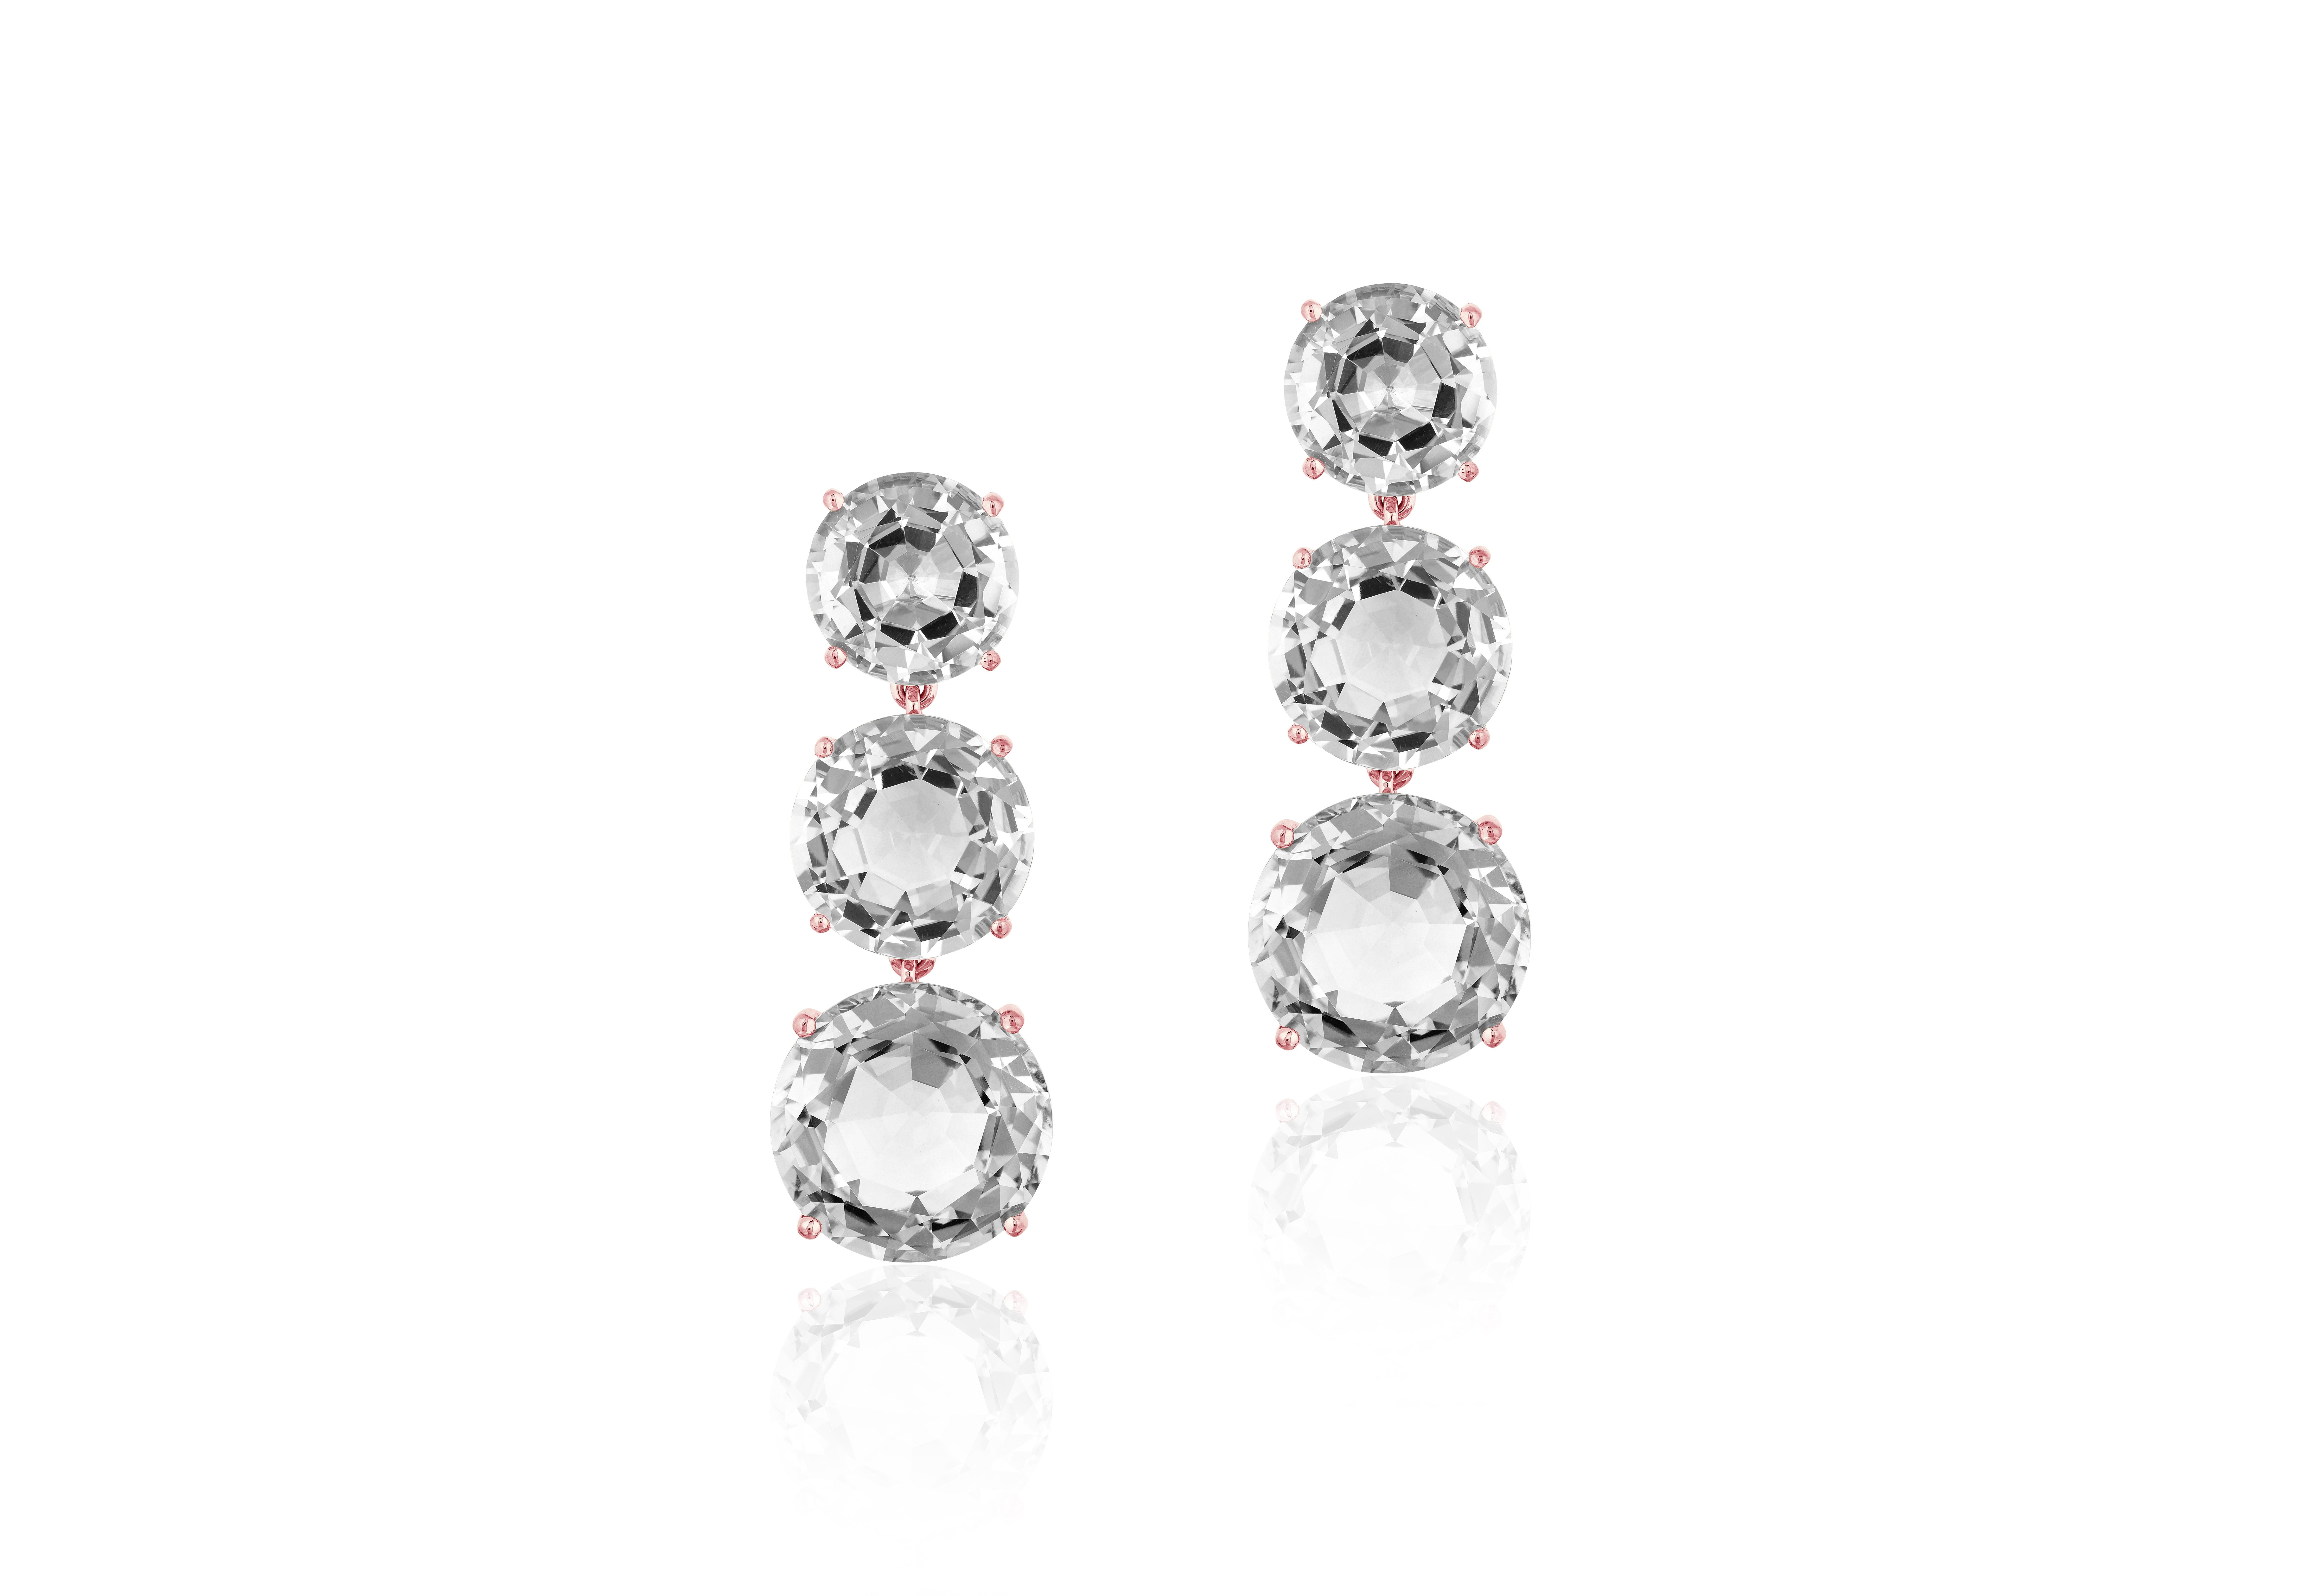 3 Tier Round Faceted Rock Crystal Earrings in 18k Rose Gold, from ‘Gossip' Collection.  Like any good piece of gossip, this piece carries a hint of shock value.

* Gemstone size: 15, 13 & 11 mm
* Gemstone: 100% Earth Mined 
* Approx. gemstone